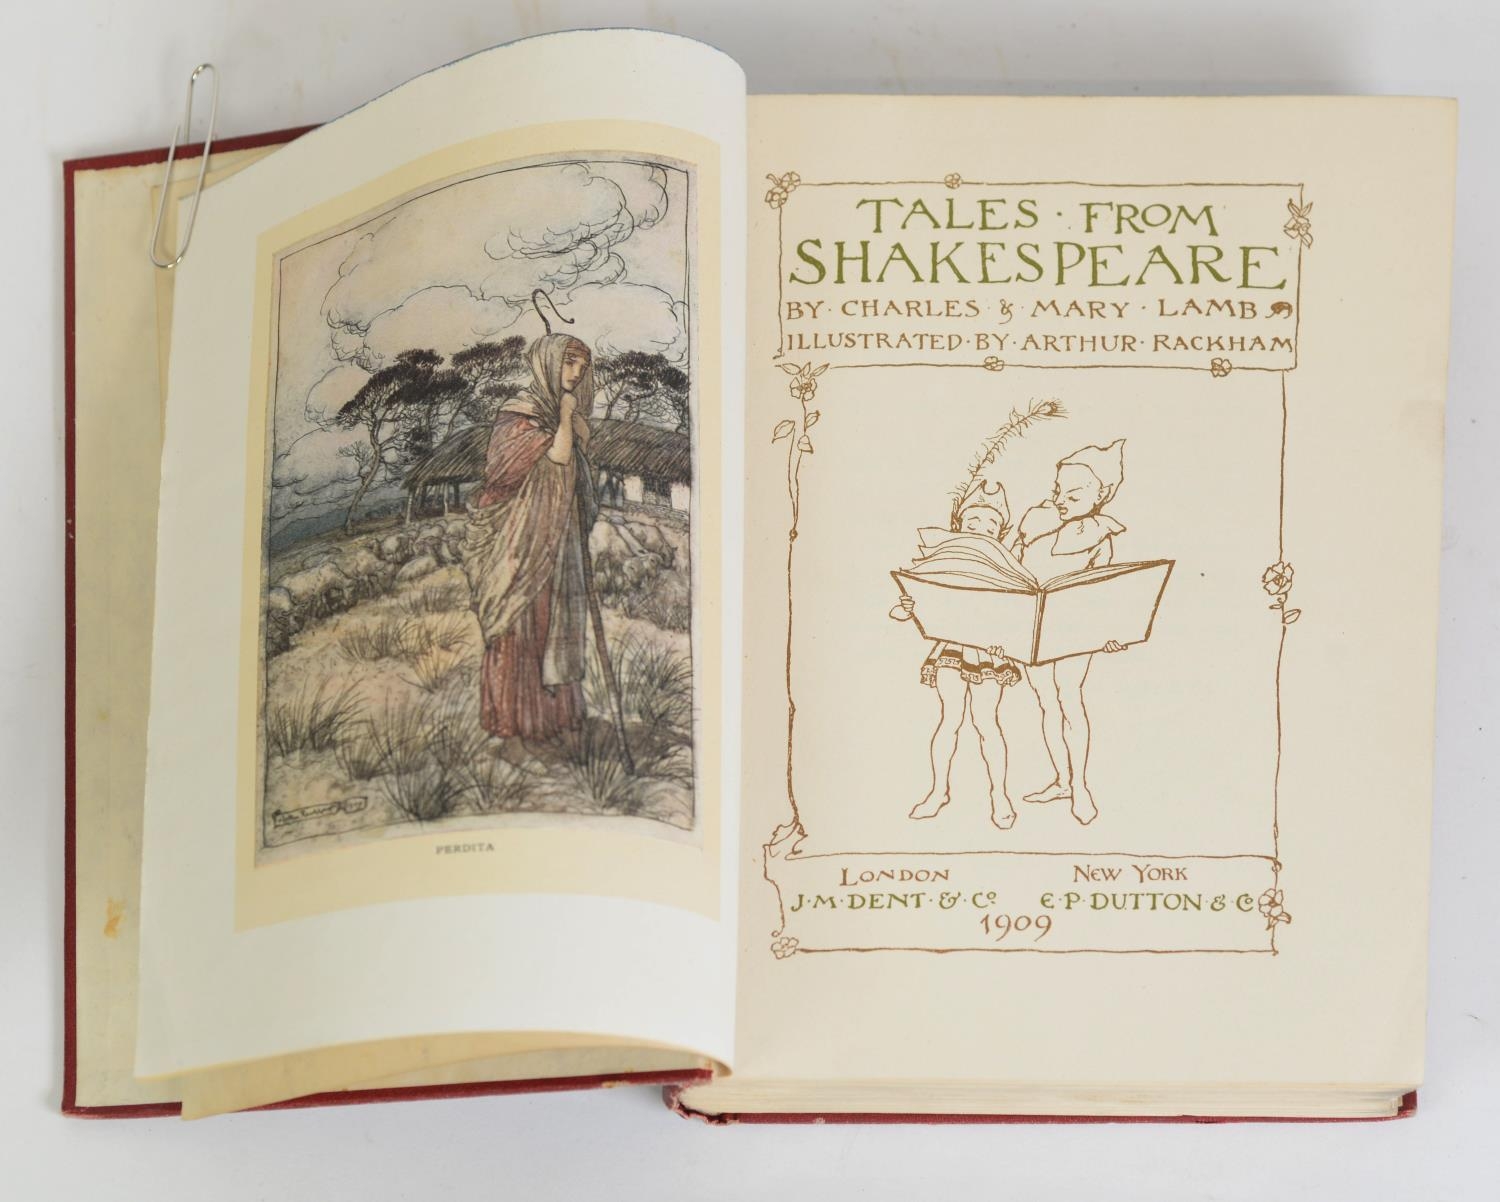 Charles & Mary Lamb - Tales From Shakespeare, illustrated by Arthur Rackham, pub London J M Dent, - Image 3 of 3